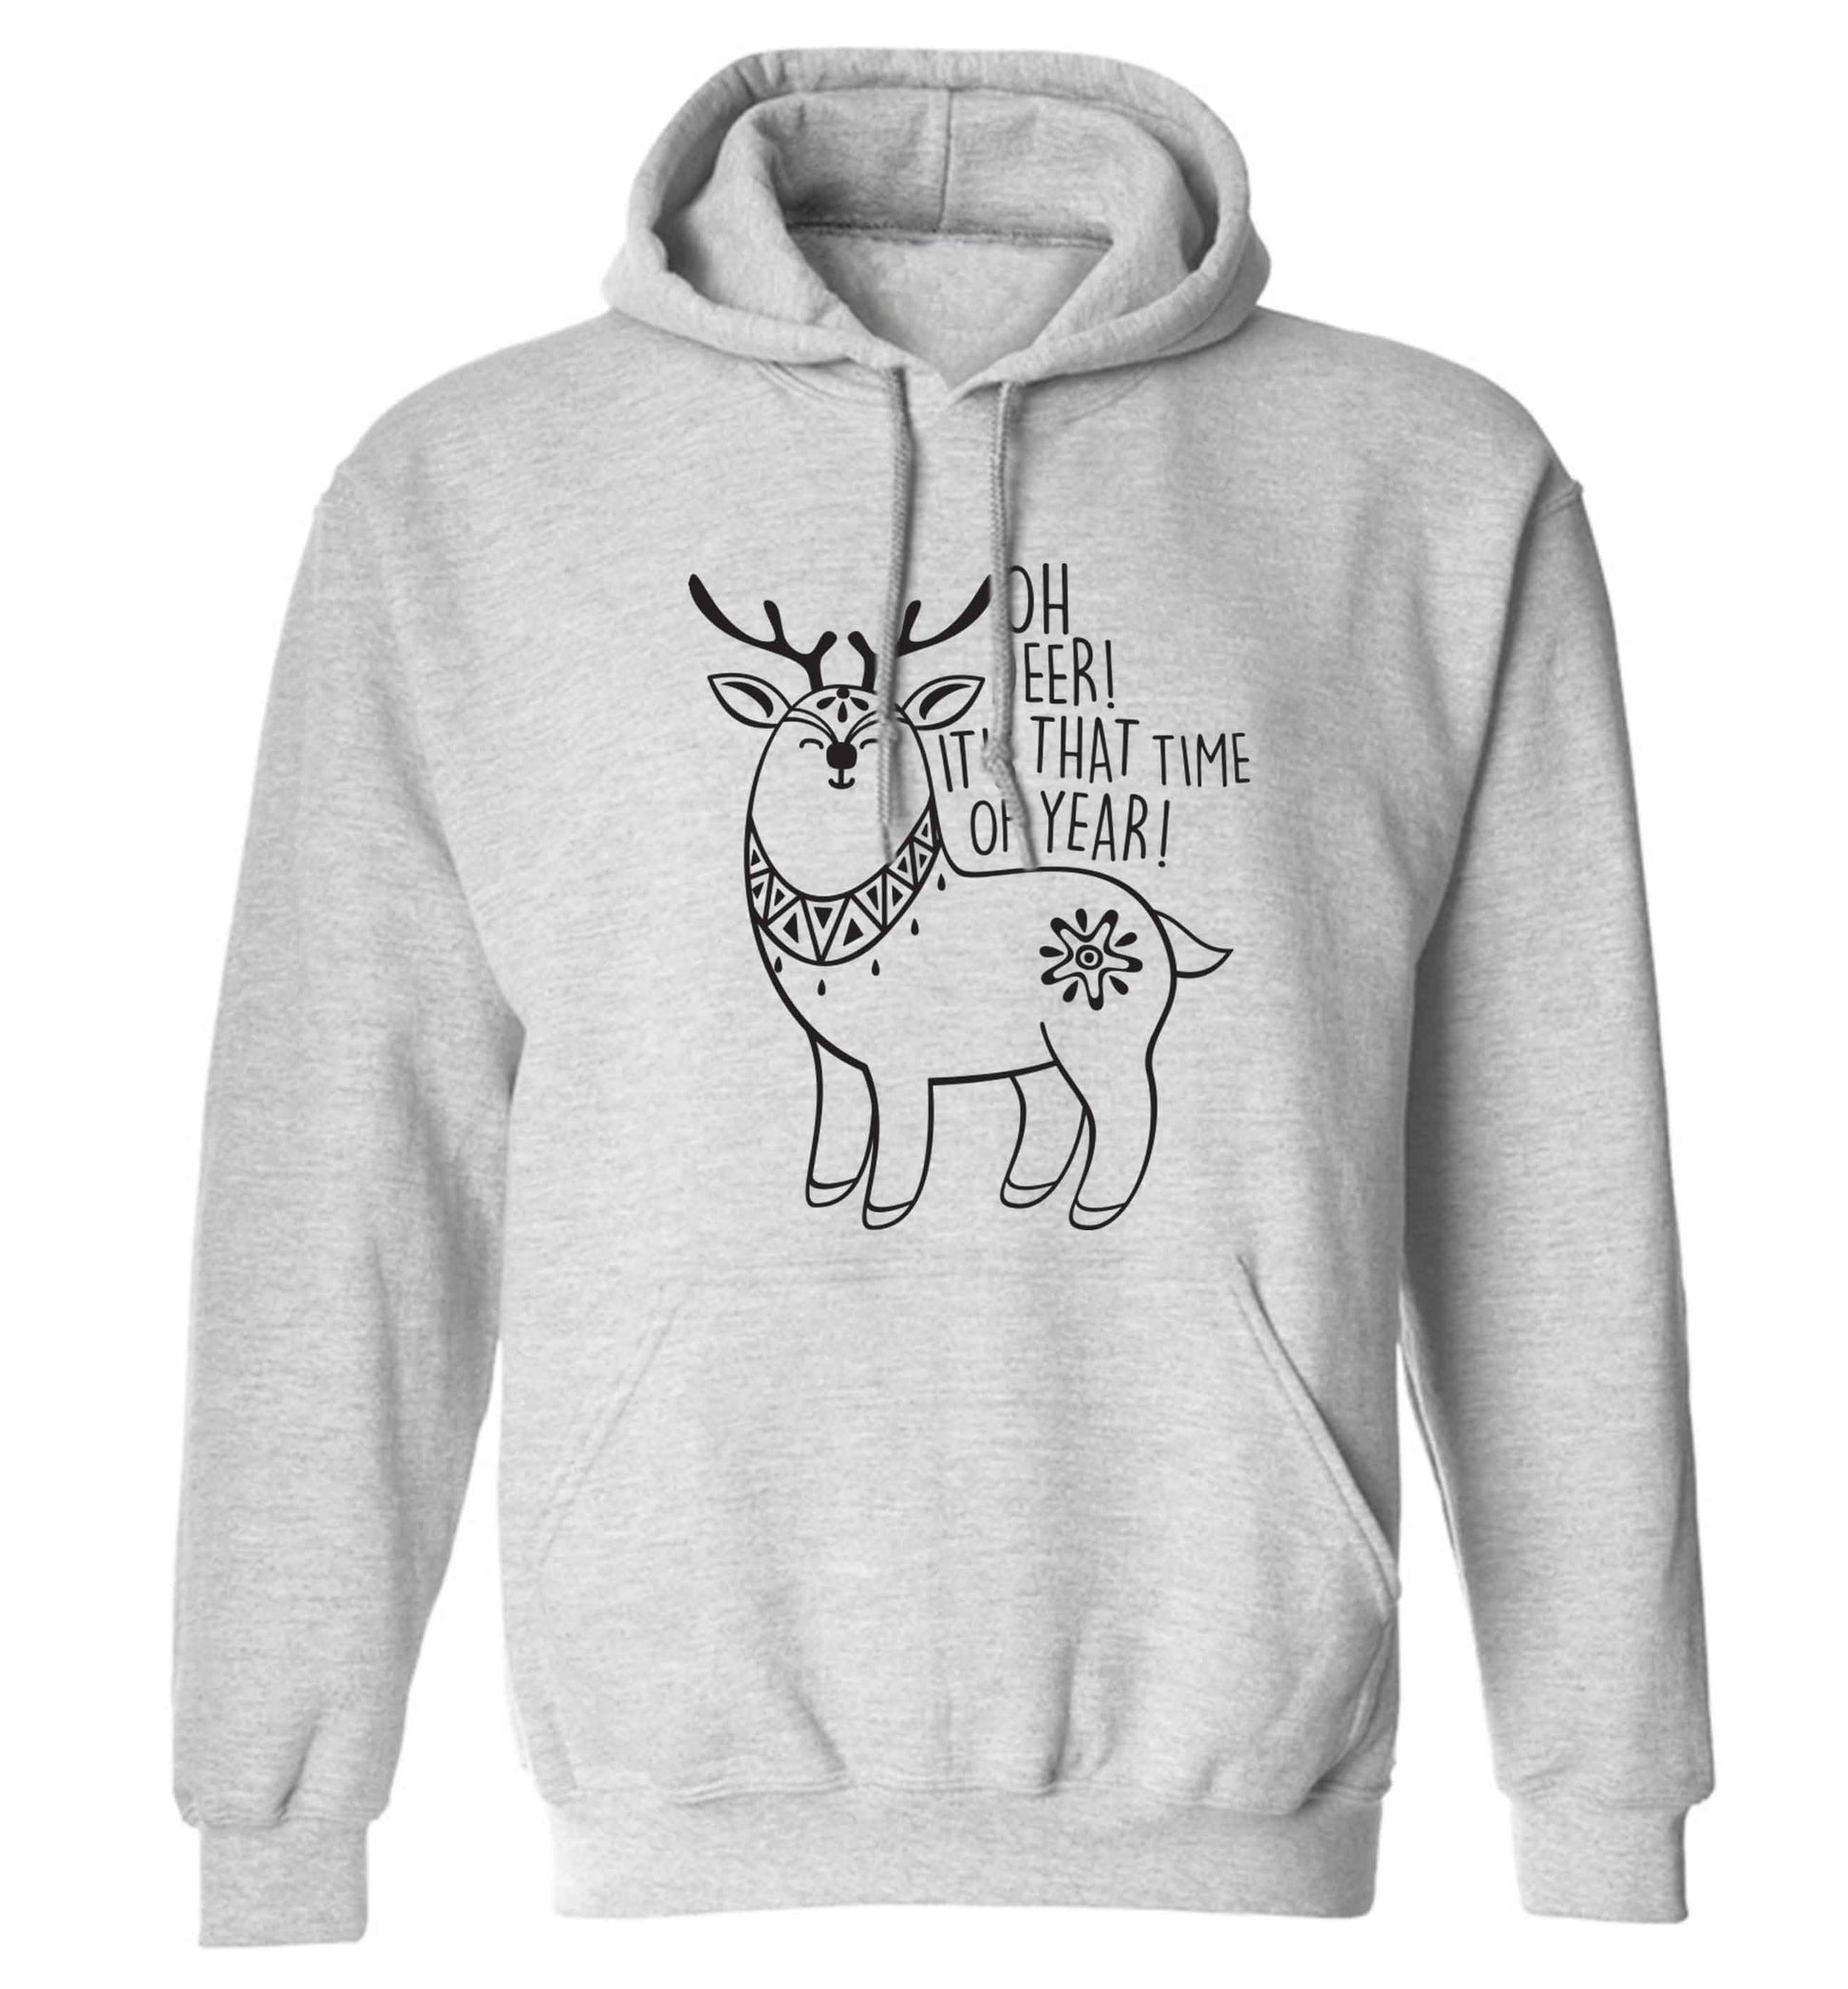 Oh dear it's that time of year adults unisex grey hoodie 2XL